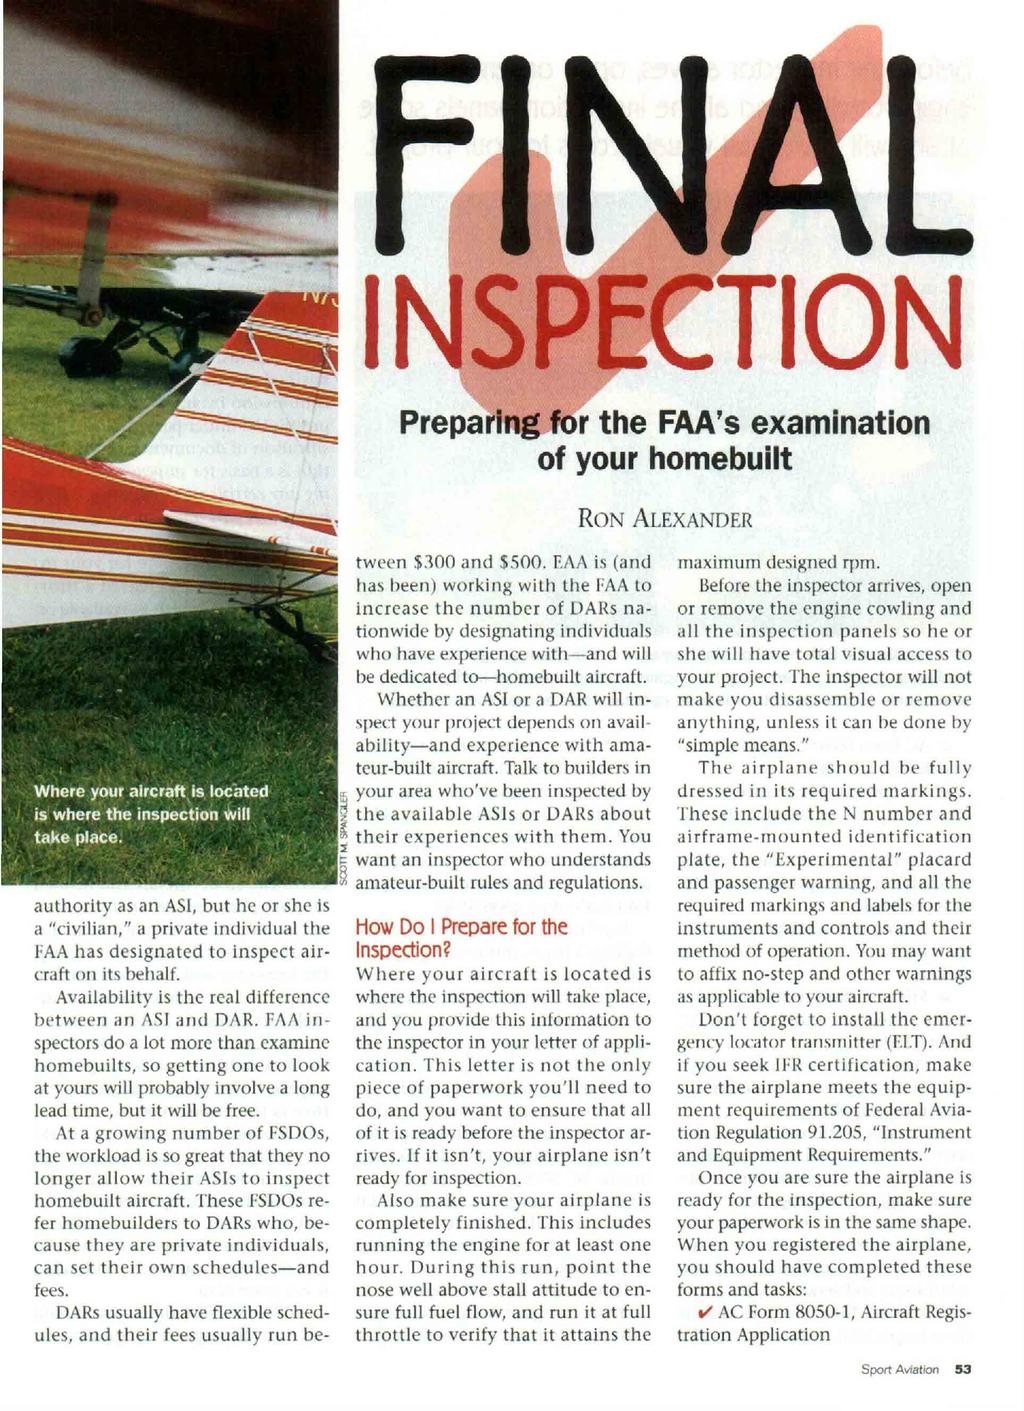 authority as an AS1, but he or she is a "civilian," a private individual the FAA has designated to inspect aircraft on its behalf. Availability is the real difference between an AS1 and DAR.